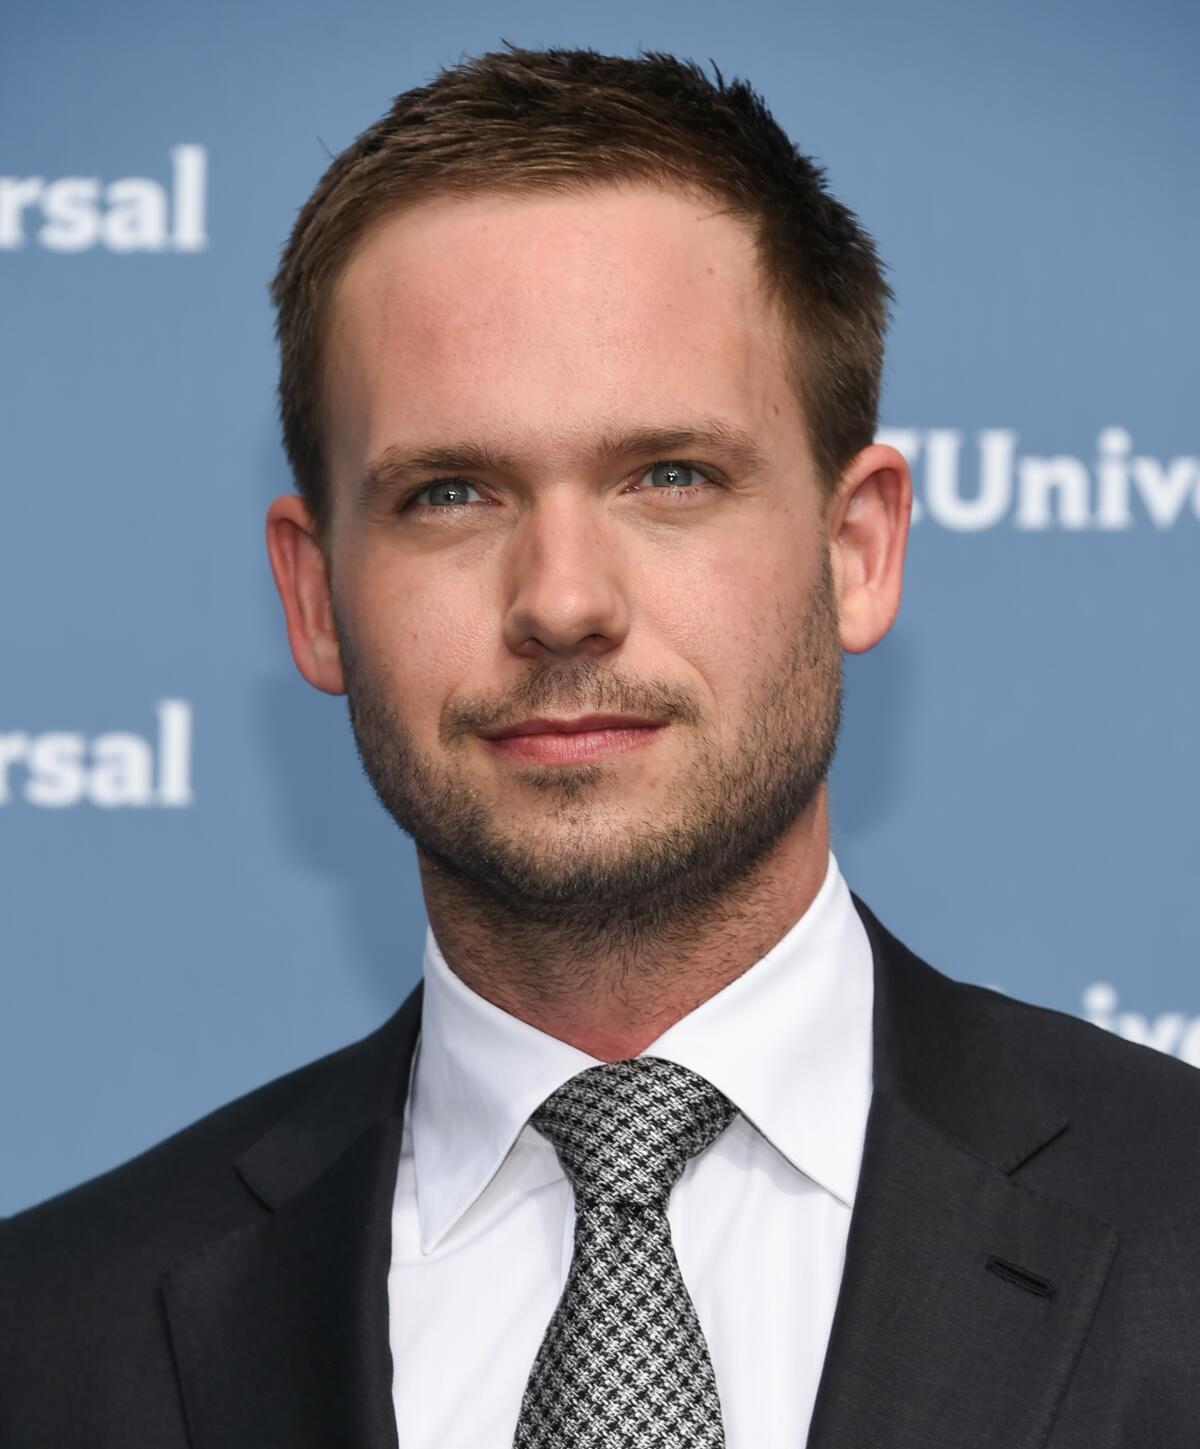 Actor Patrick J. Adams looks straight ahead in a dark suit, white shirt, silver patterned tie and facial stubble